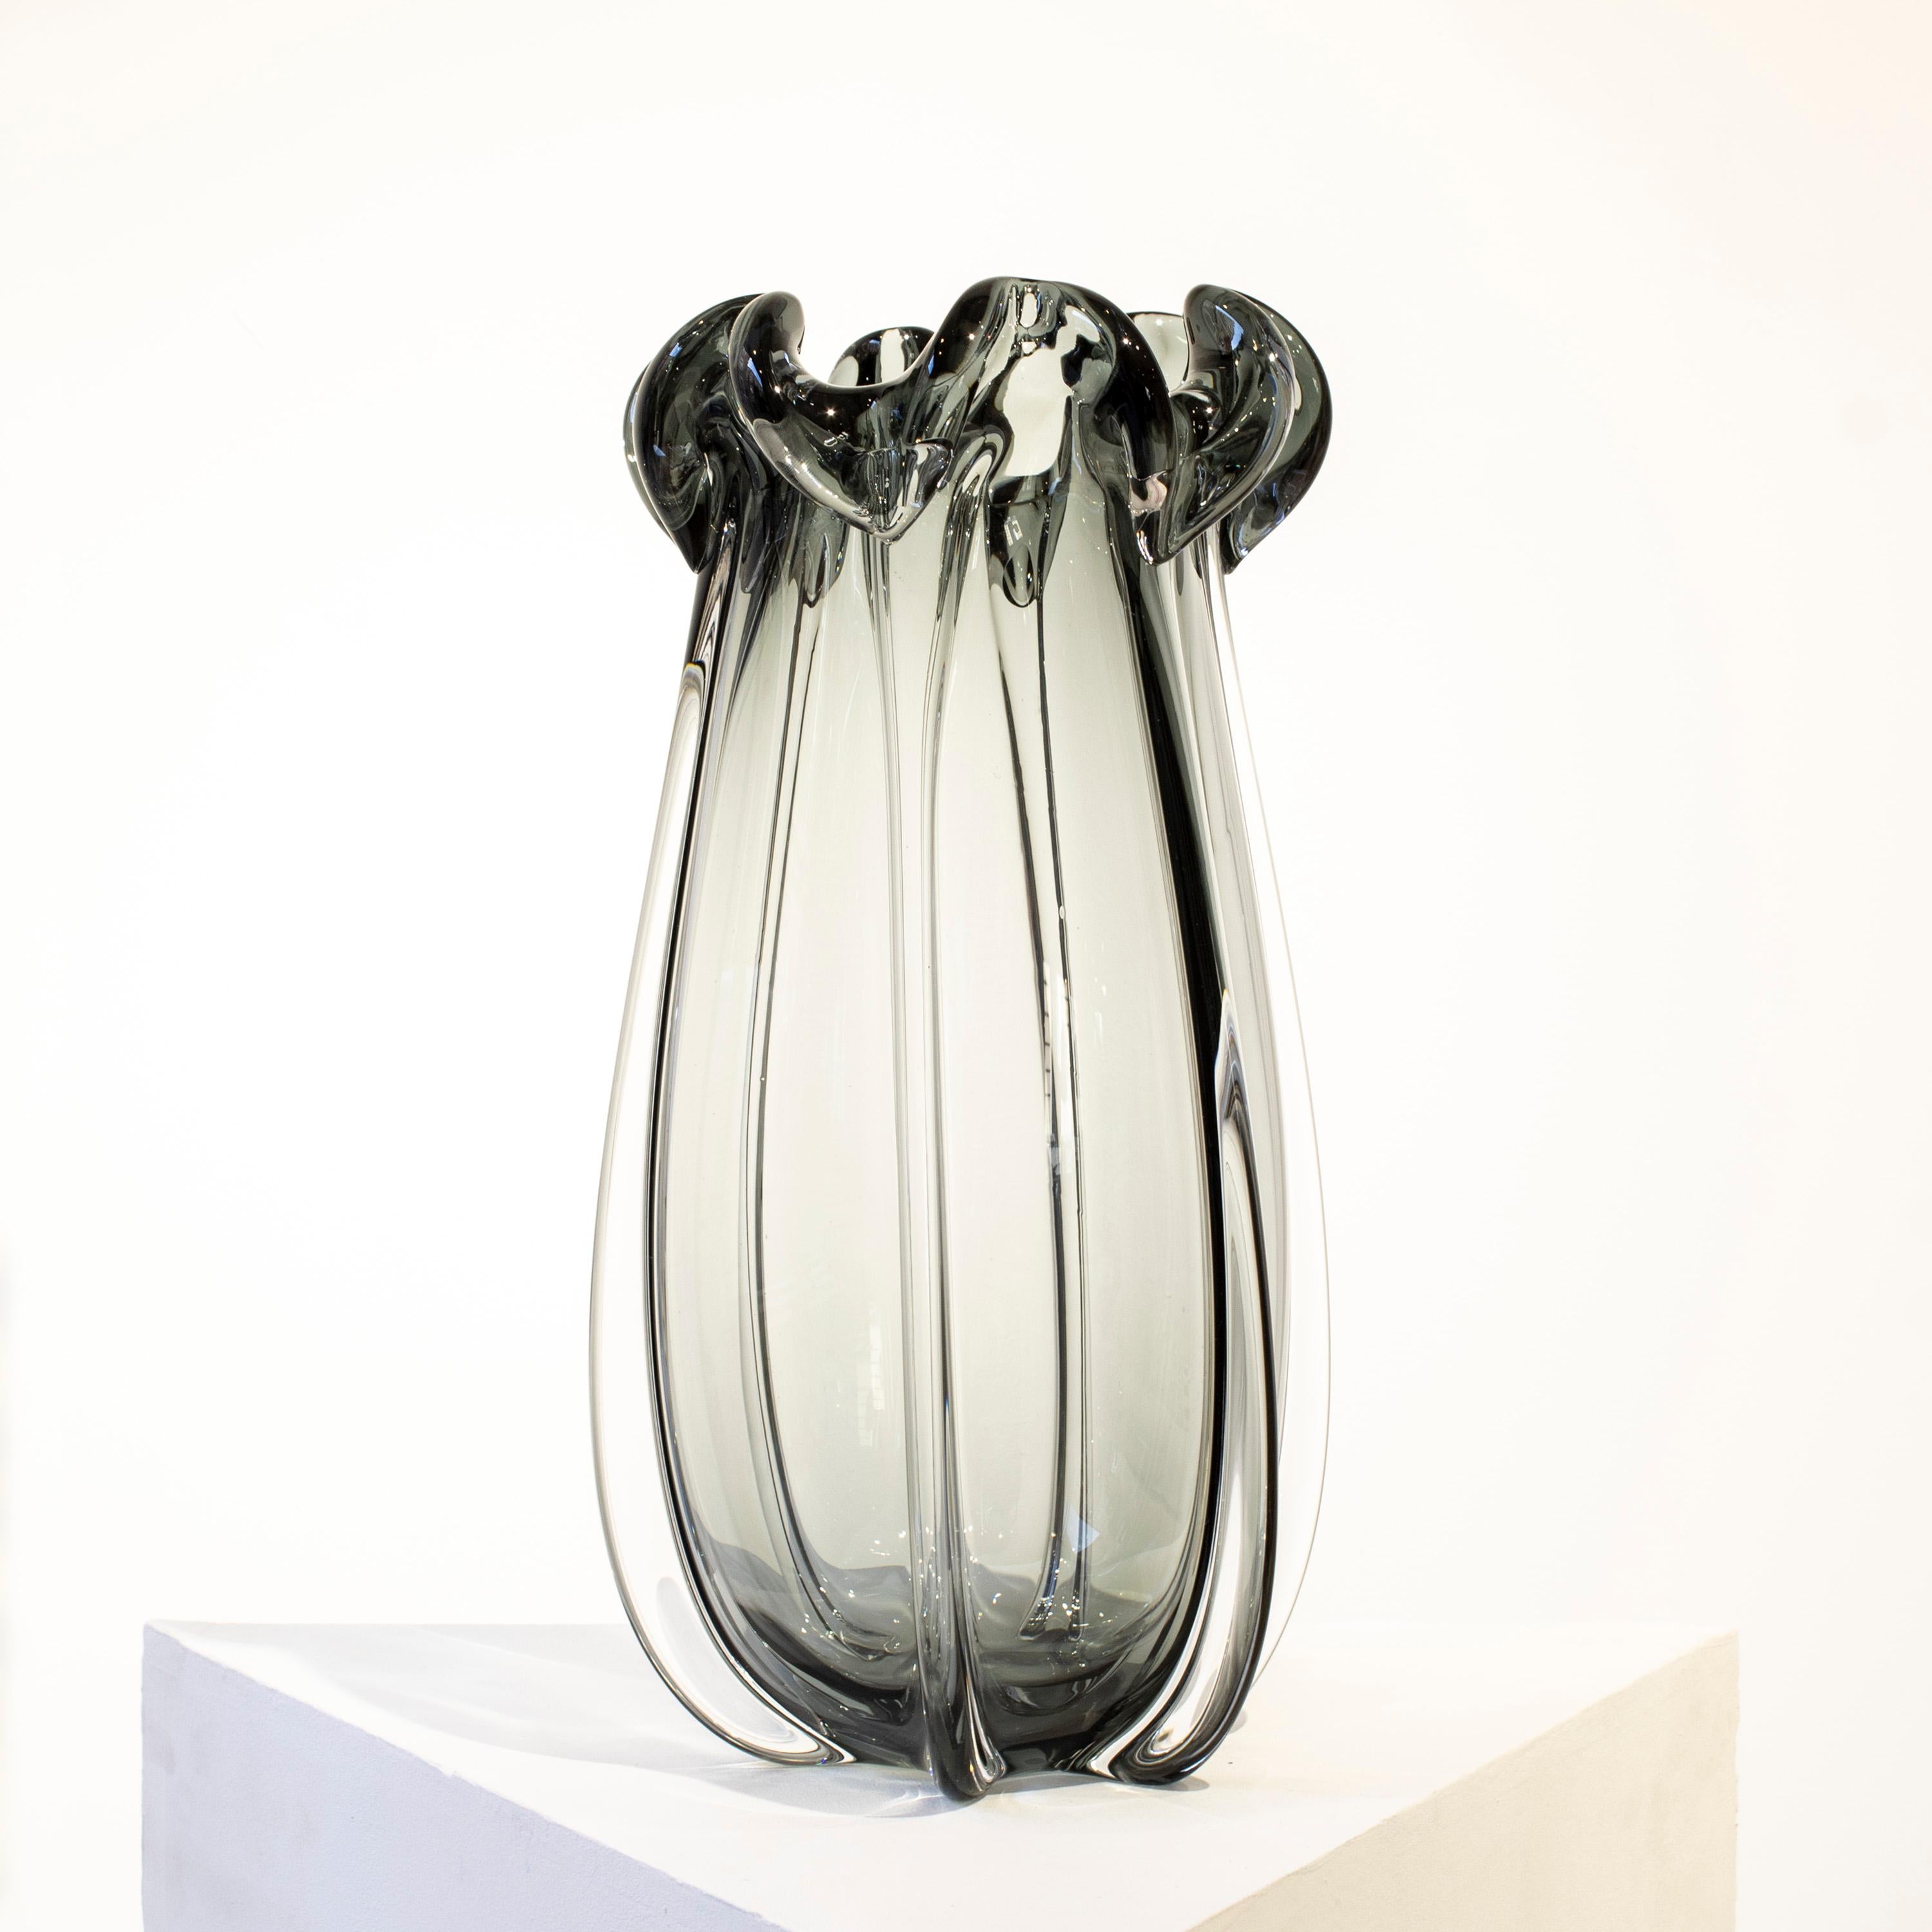 Hand-blown Italian grey semi-transparent glass vase, with organic shapes inspired by nature. 